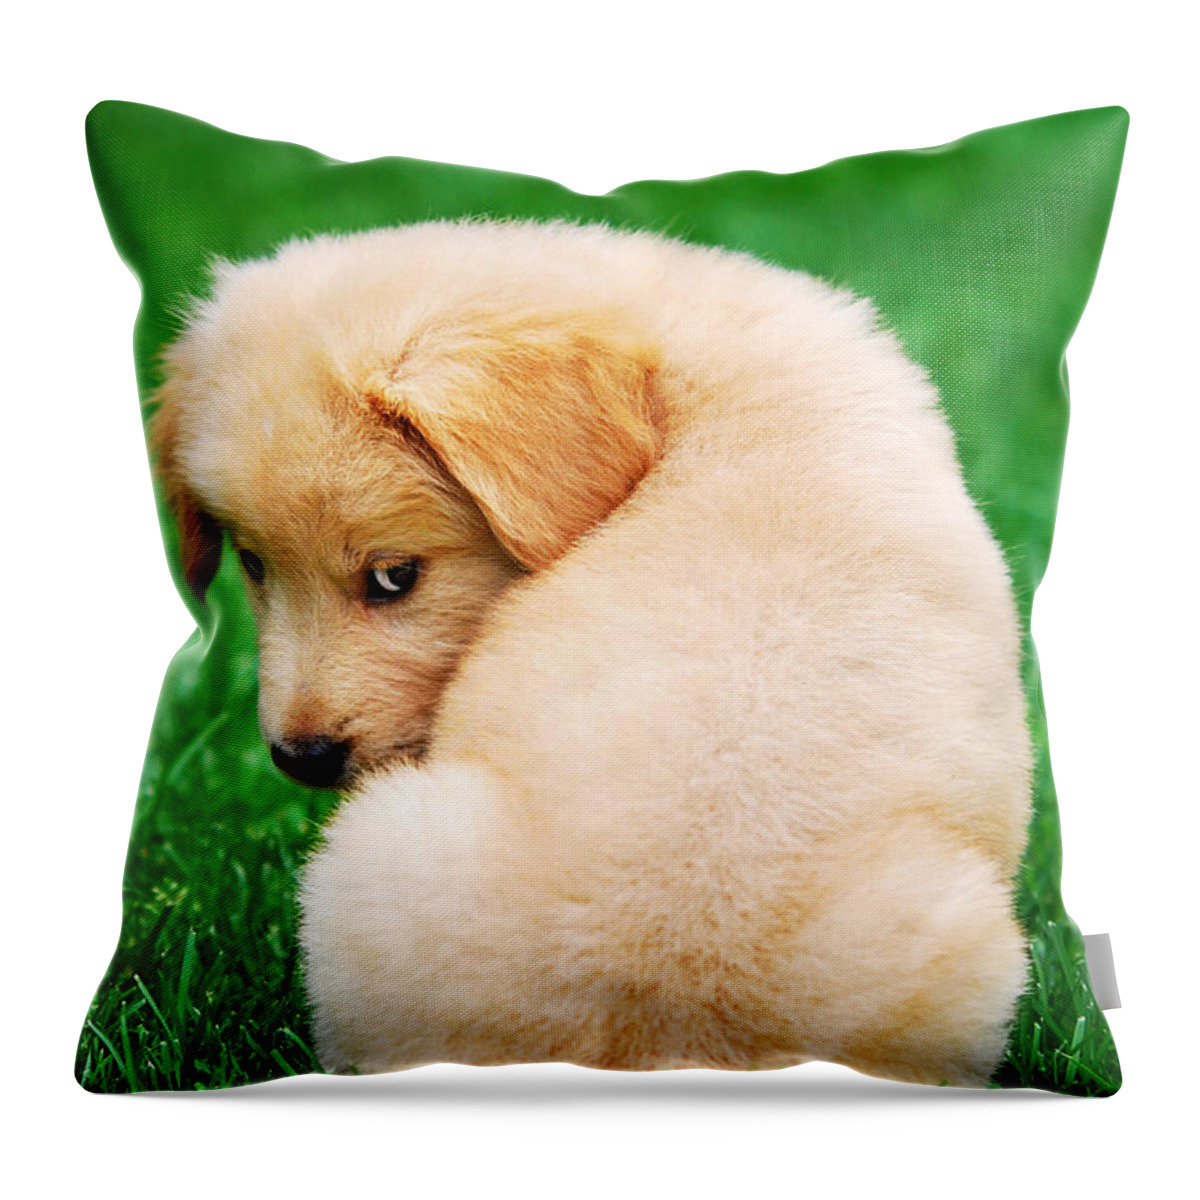 Golden Retriever Throw Pillow featuring the photograph Puppy Love by Christina Rollo